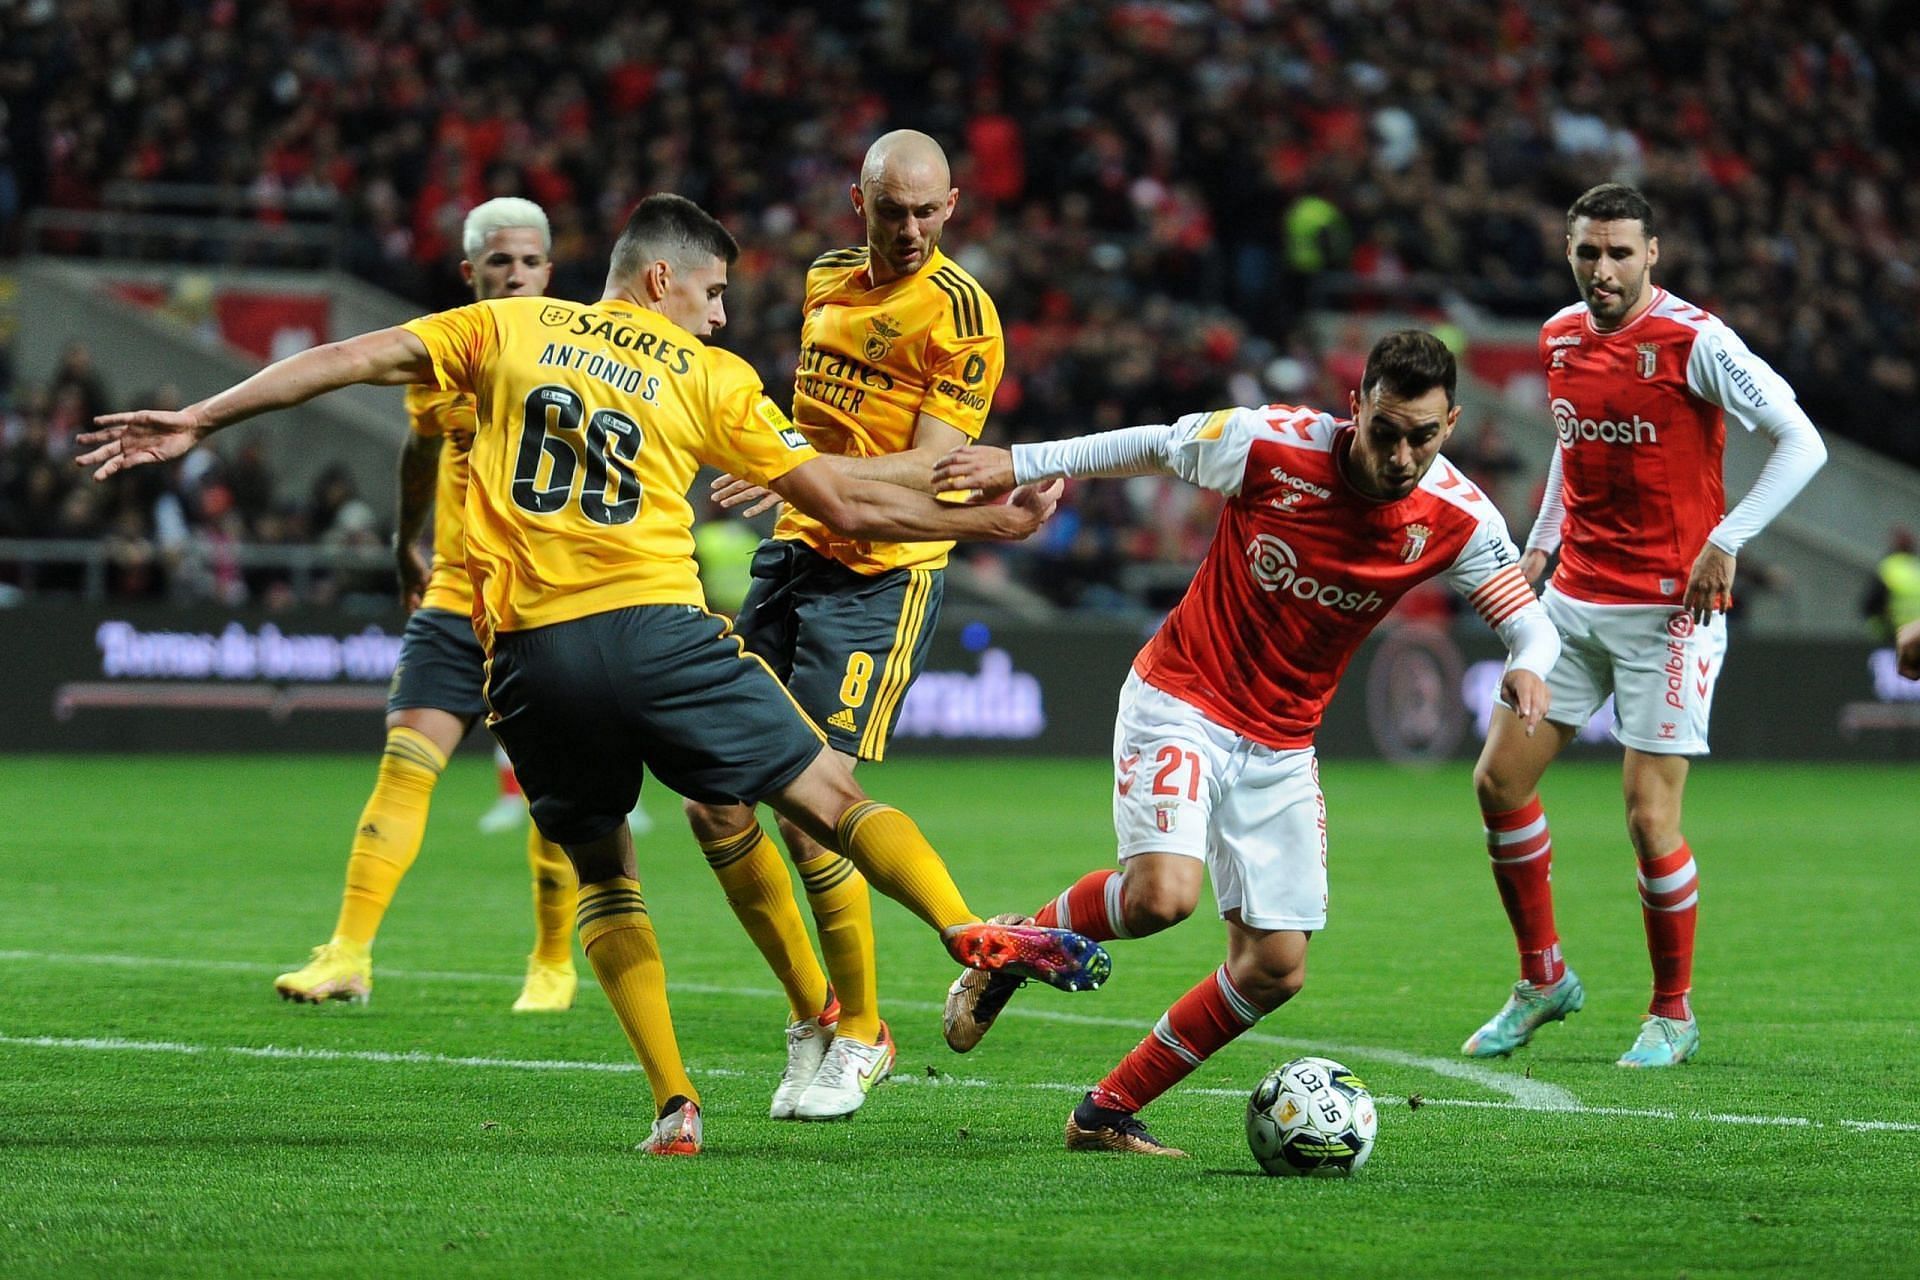 Braga and Benfica square off in an excting Primeira Liga clash on Sunday